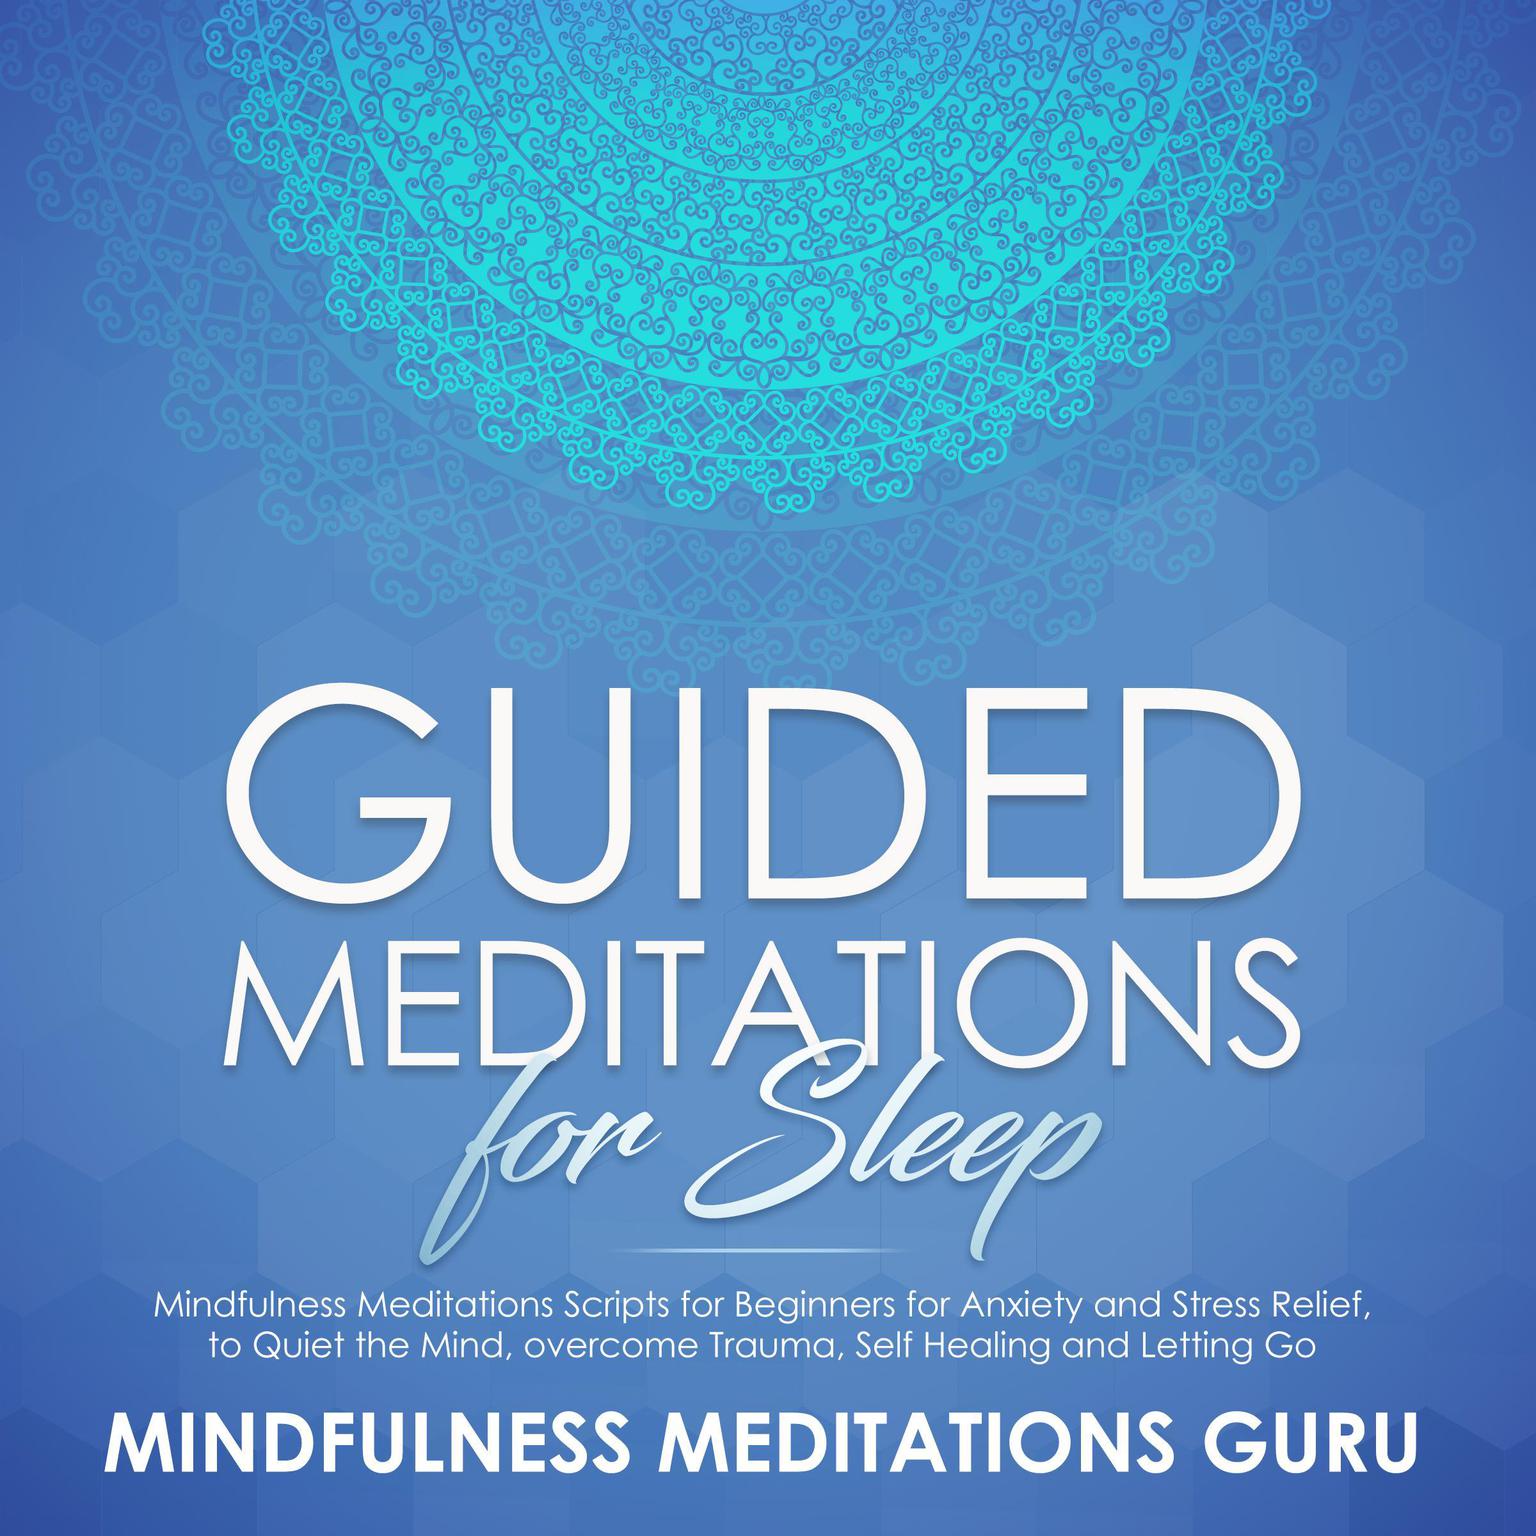 Guided Meditations for Sleep: Mindfulness Meditations Scripts for Beginners for Anxiety and Stress Relief, to Quiet the Mind, overcome Trauma, Self Healing and Letting Go Audiobook, by Mindfulness Meditations Guru